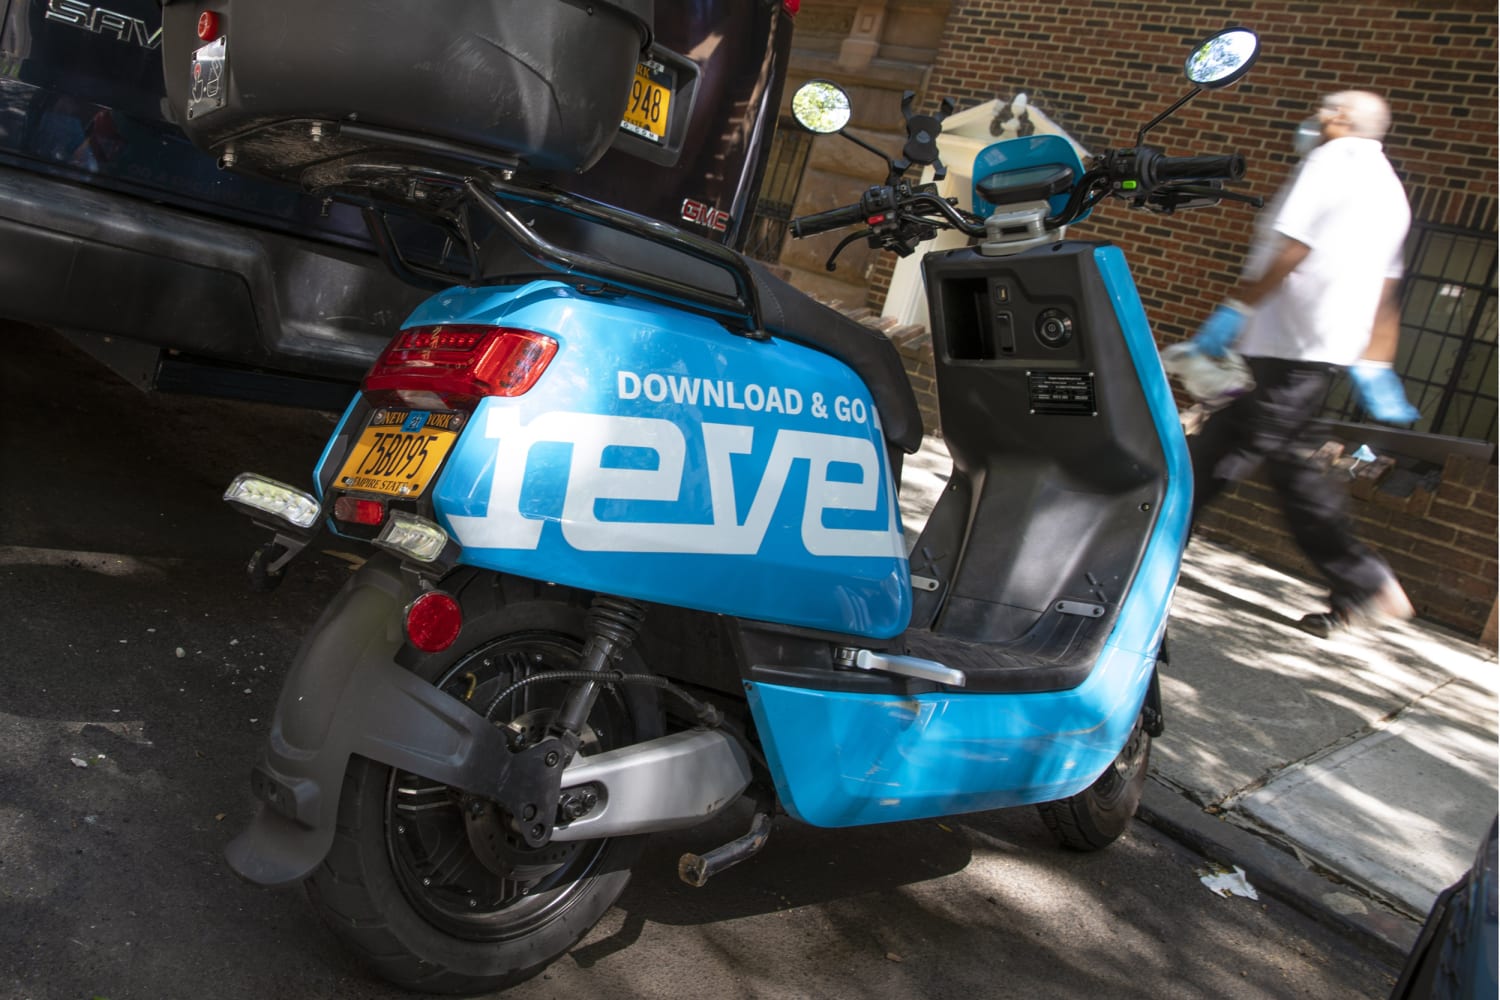 Oakland CA now has Revel's 30 MPH shared electric mopeds